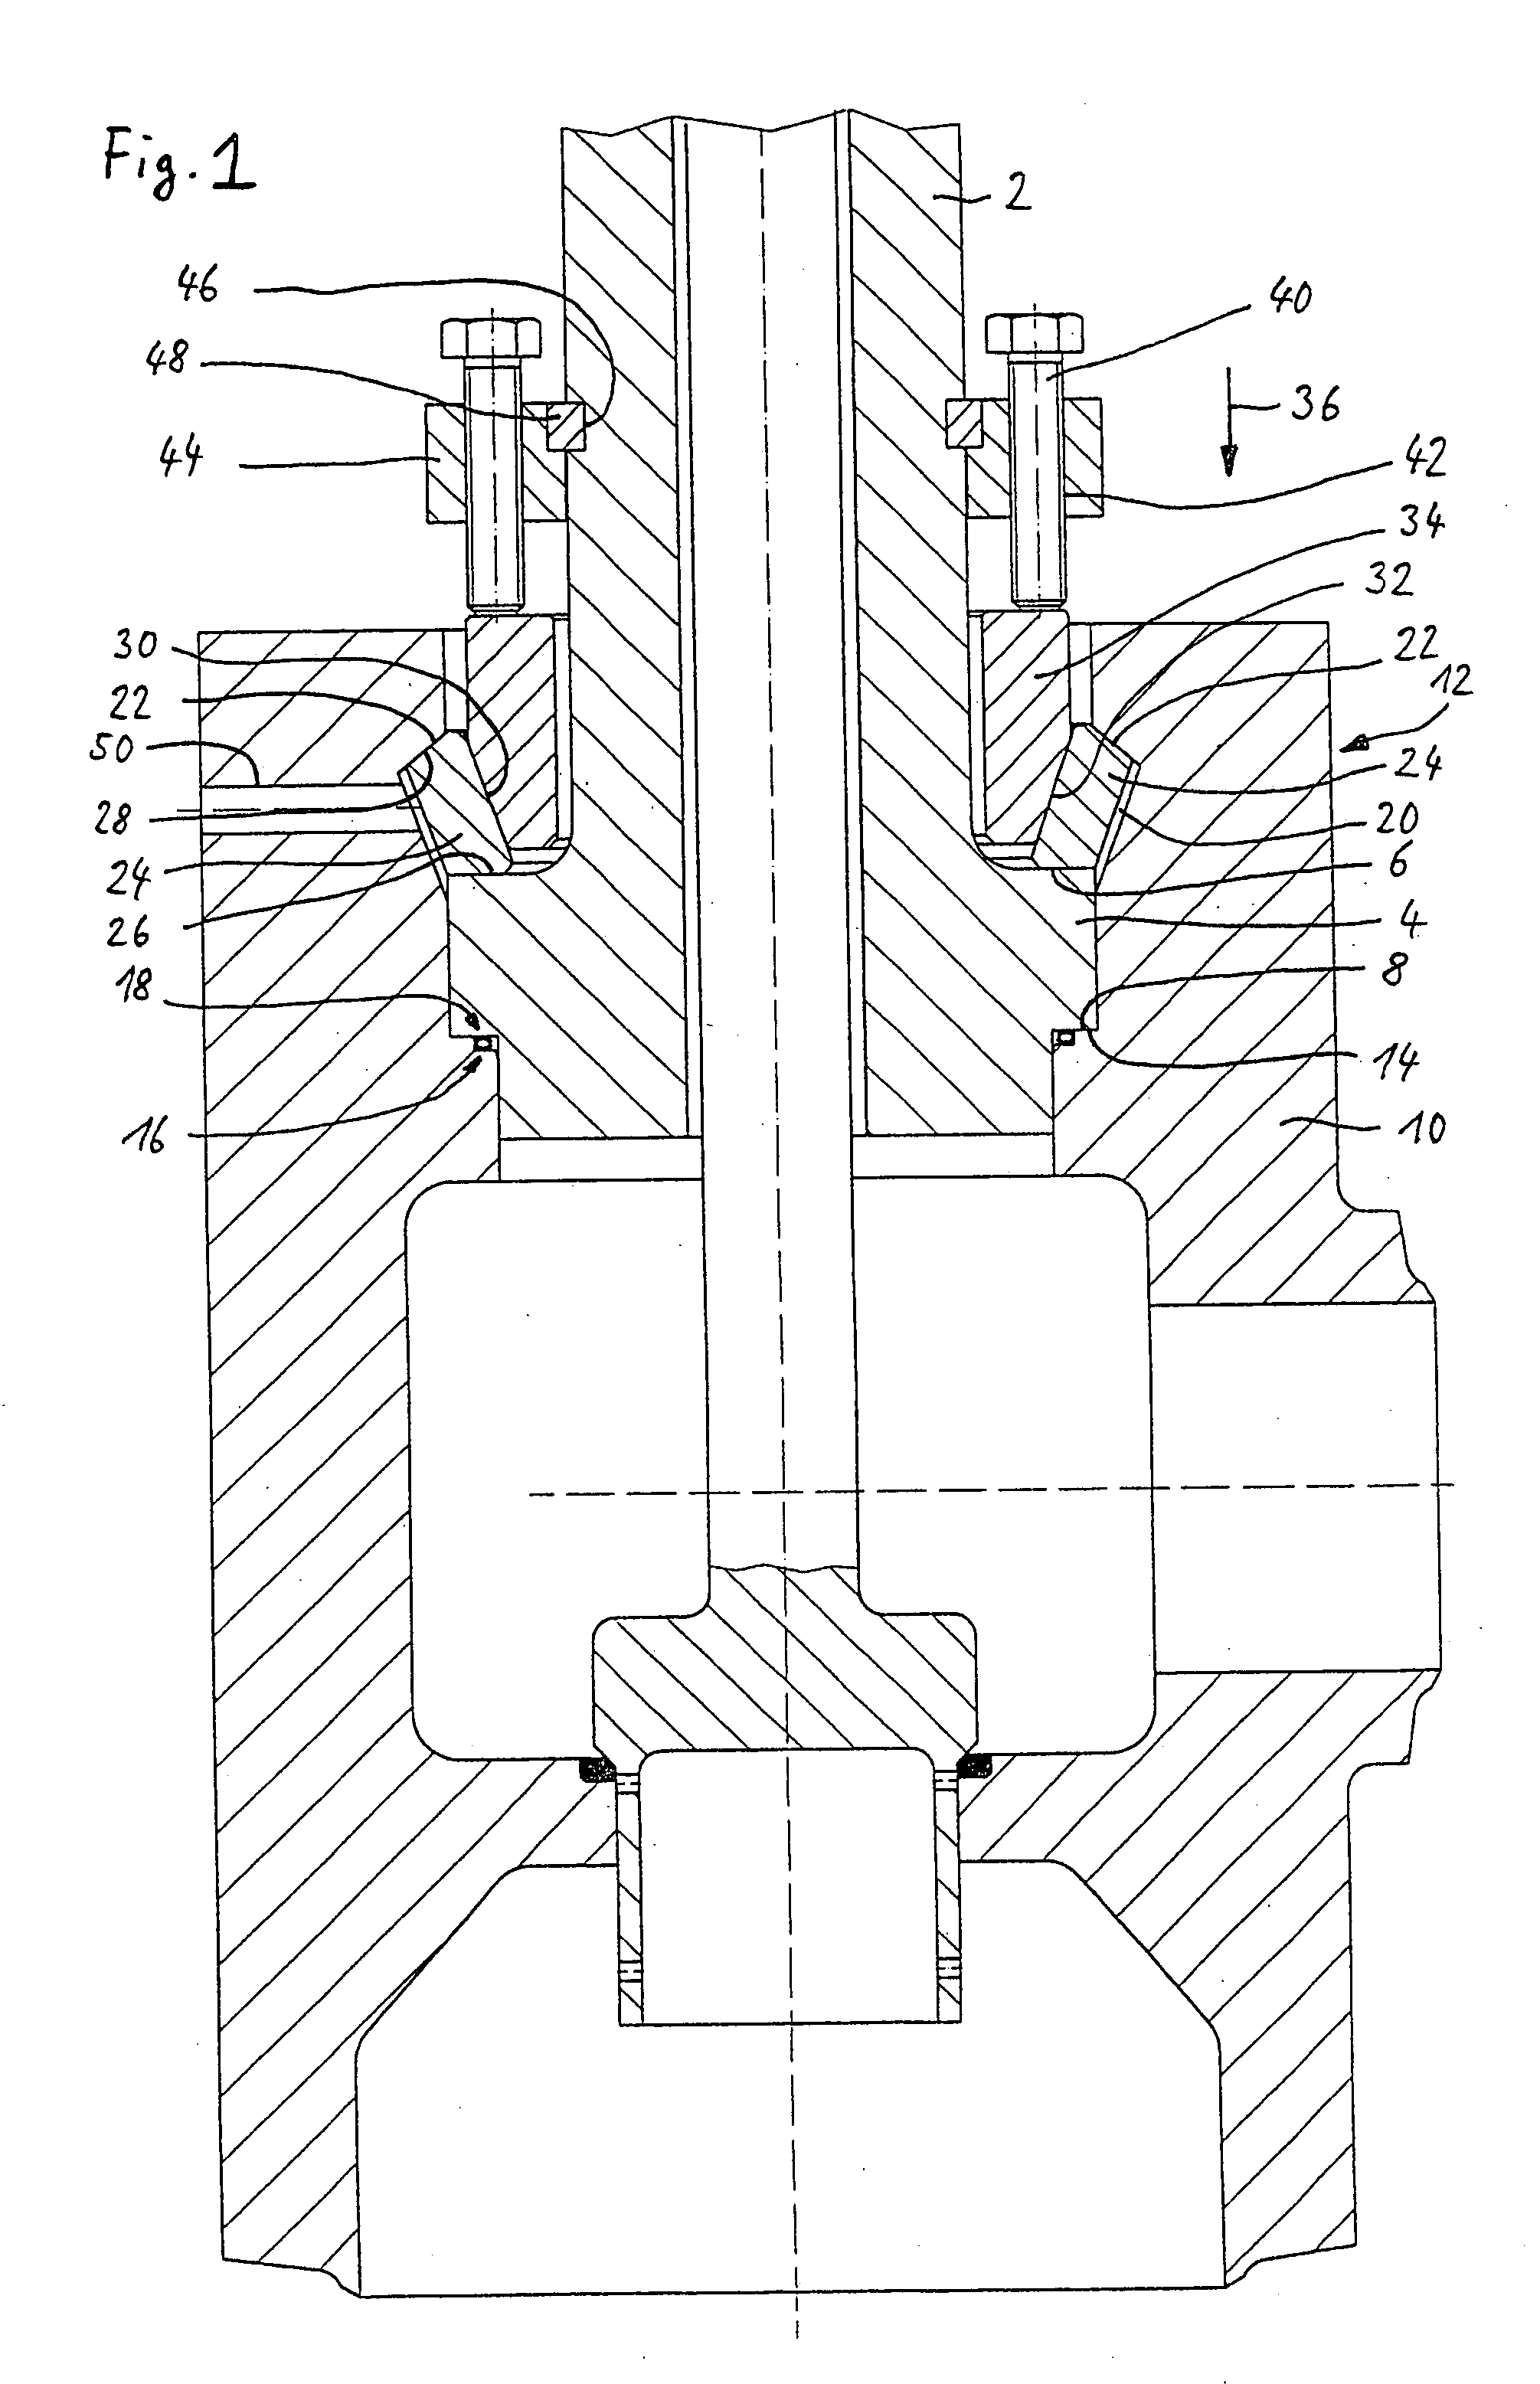 Releasable connection arrangement for two rotationally symmetrical components